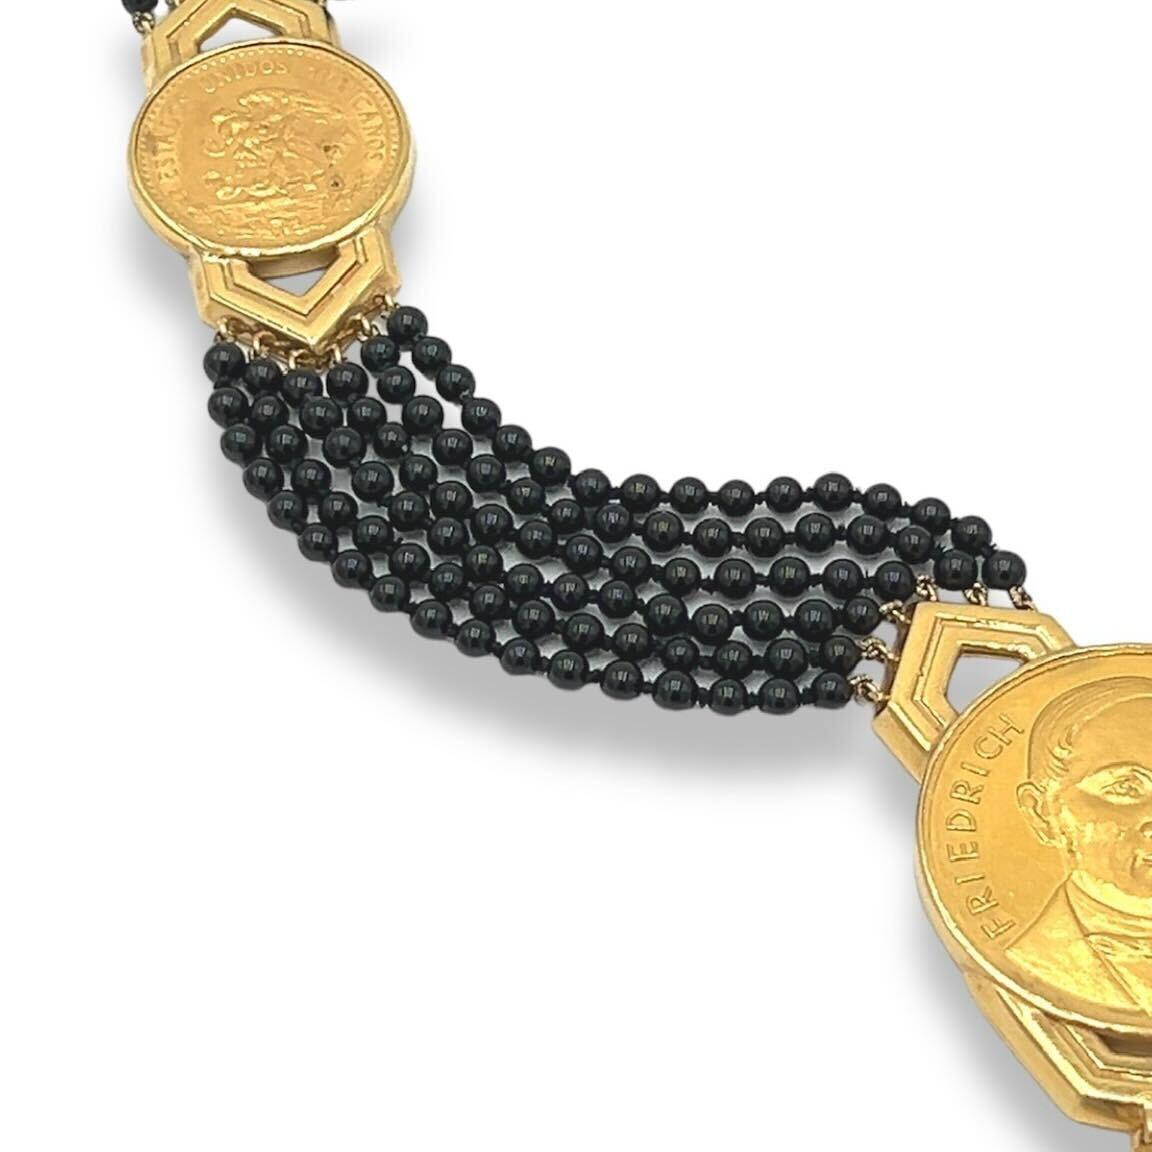 An 18 karat yellow gold and high karat gold, black onyx and diamond necklace, Emis Beros, circa 1970s.  Designed as a six (6) strand necklace of black onyx beads punctuated with six (6) graduated gold coins from various nations set within gold